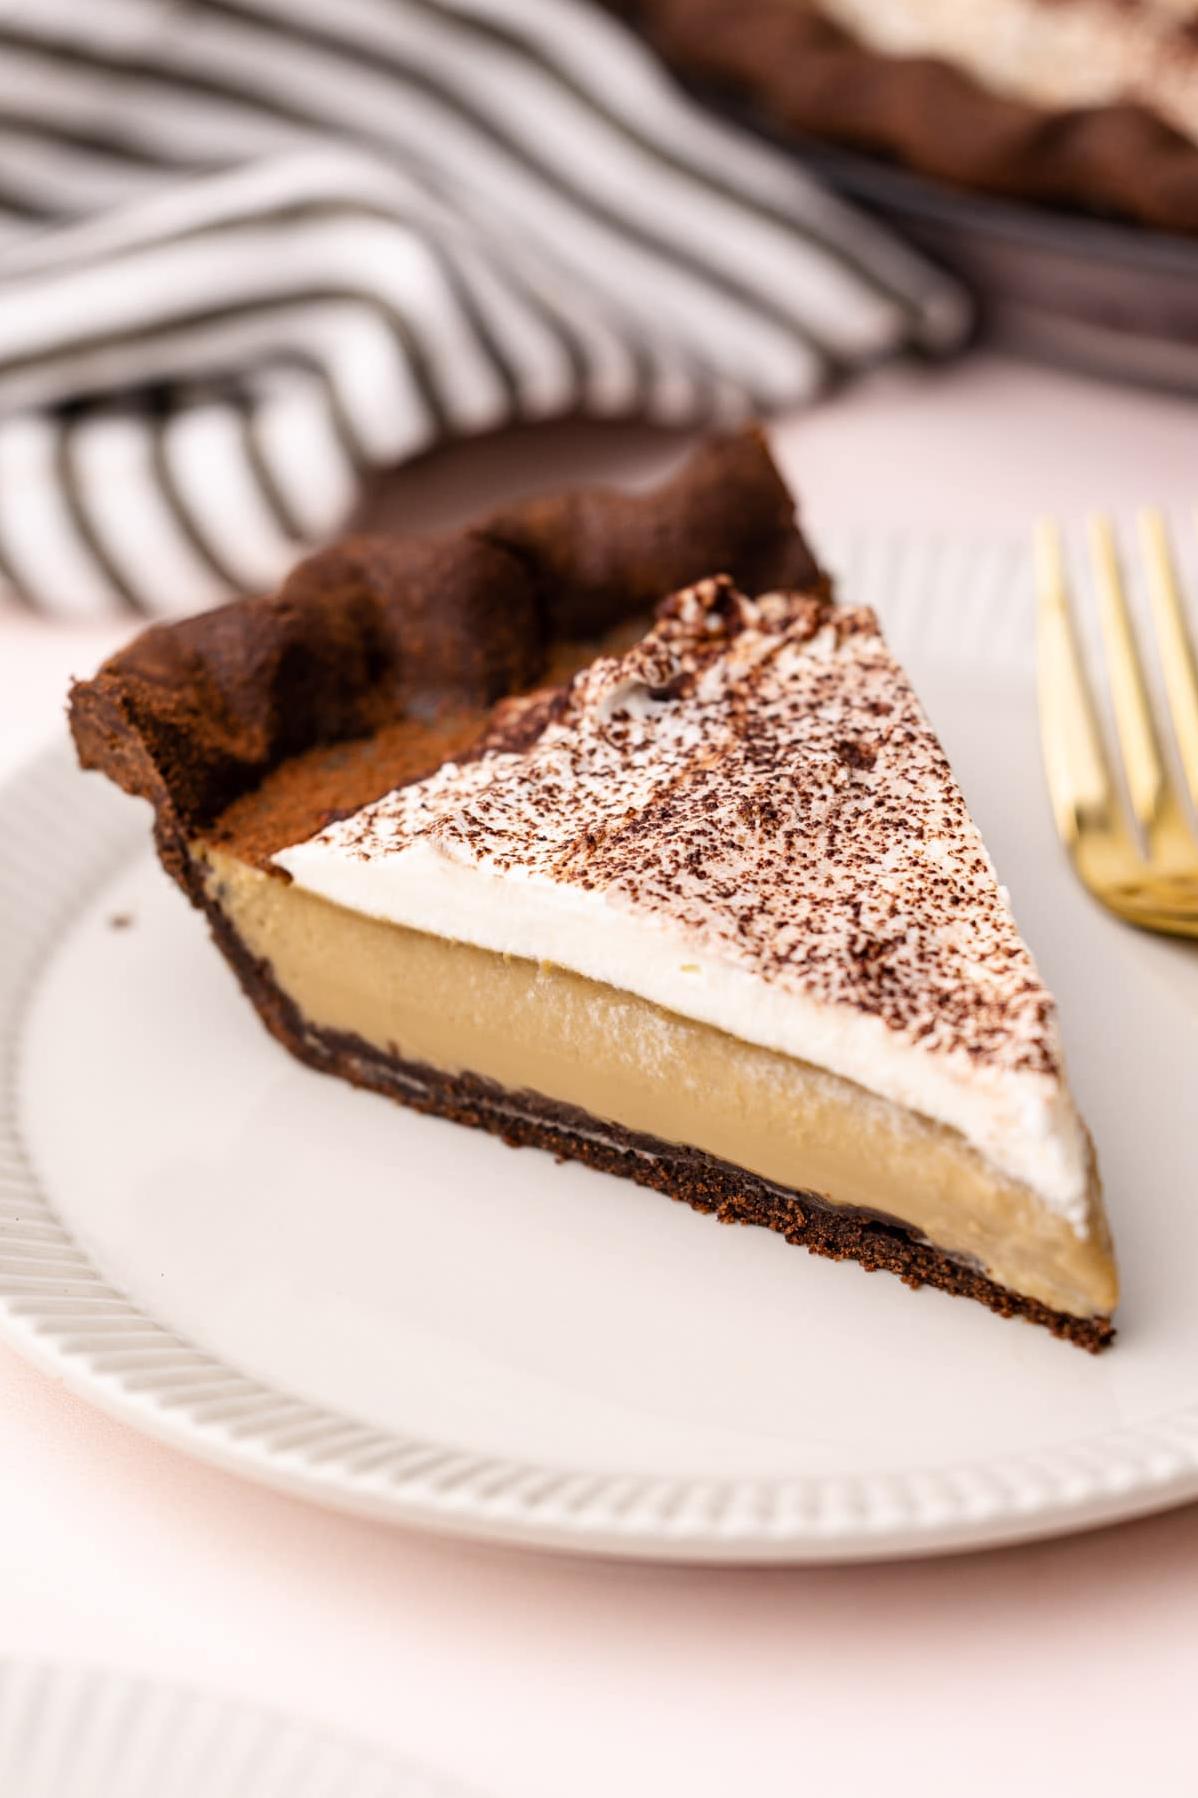  This creamy and delicious pie will have you going back for seconds.